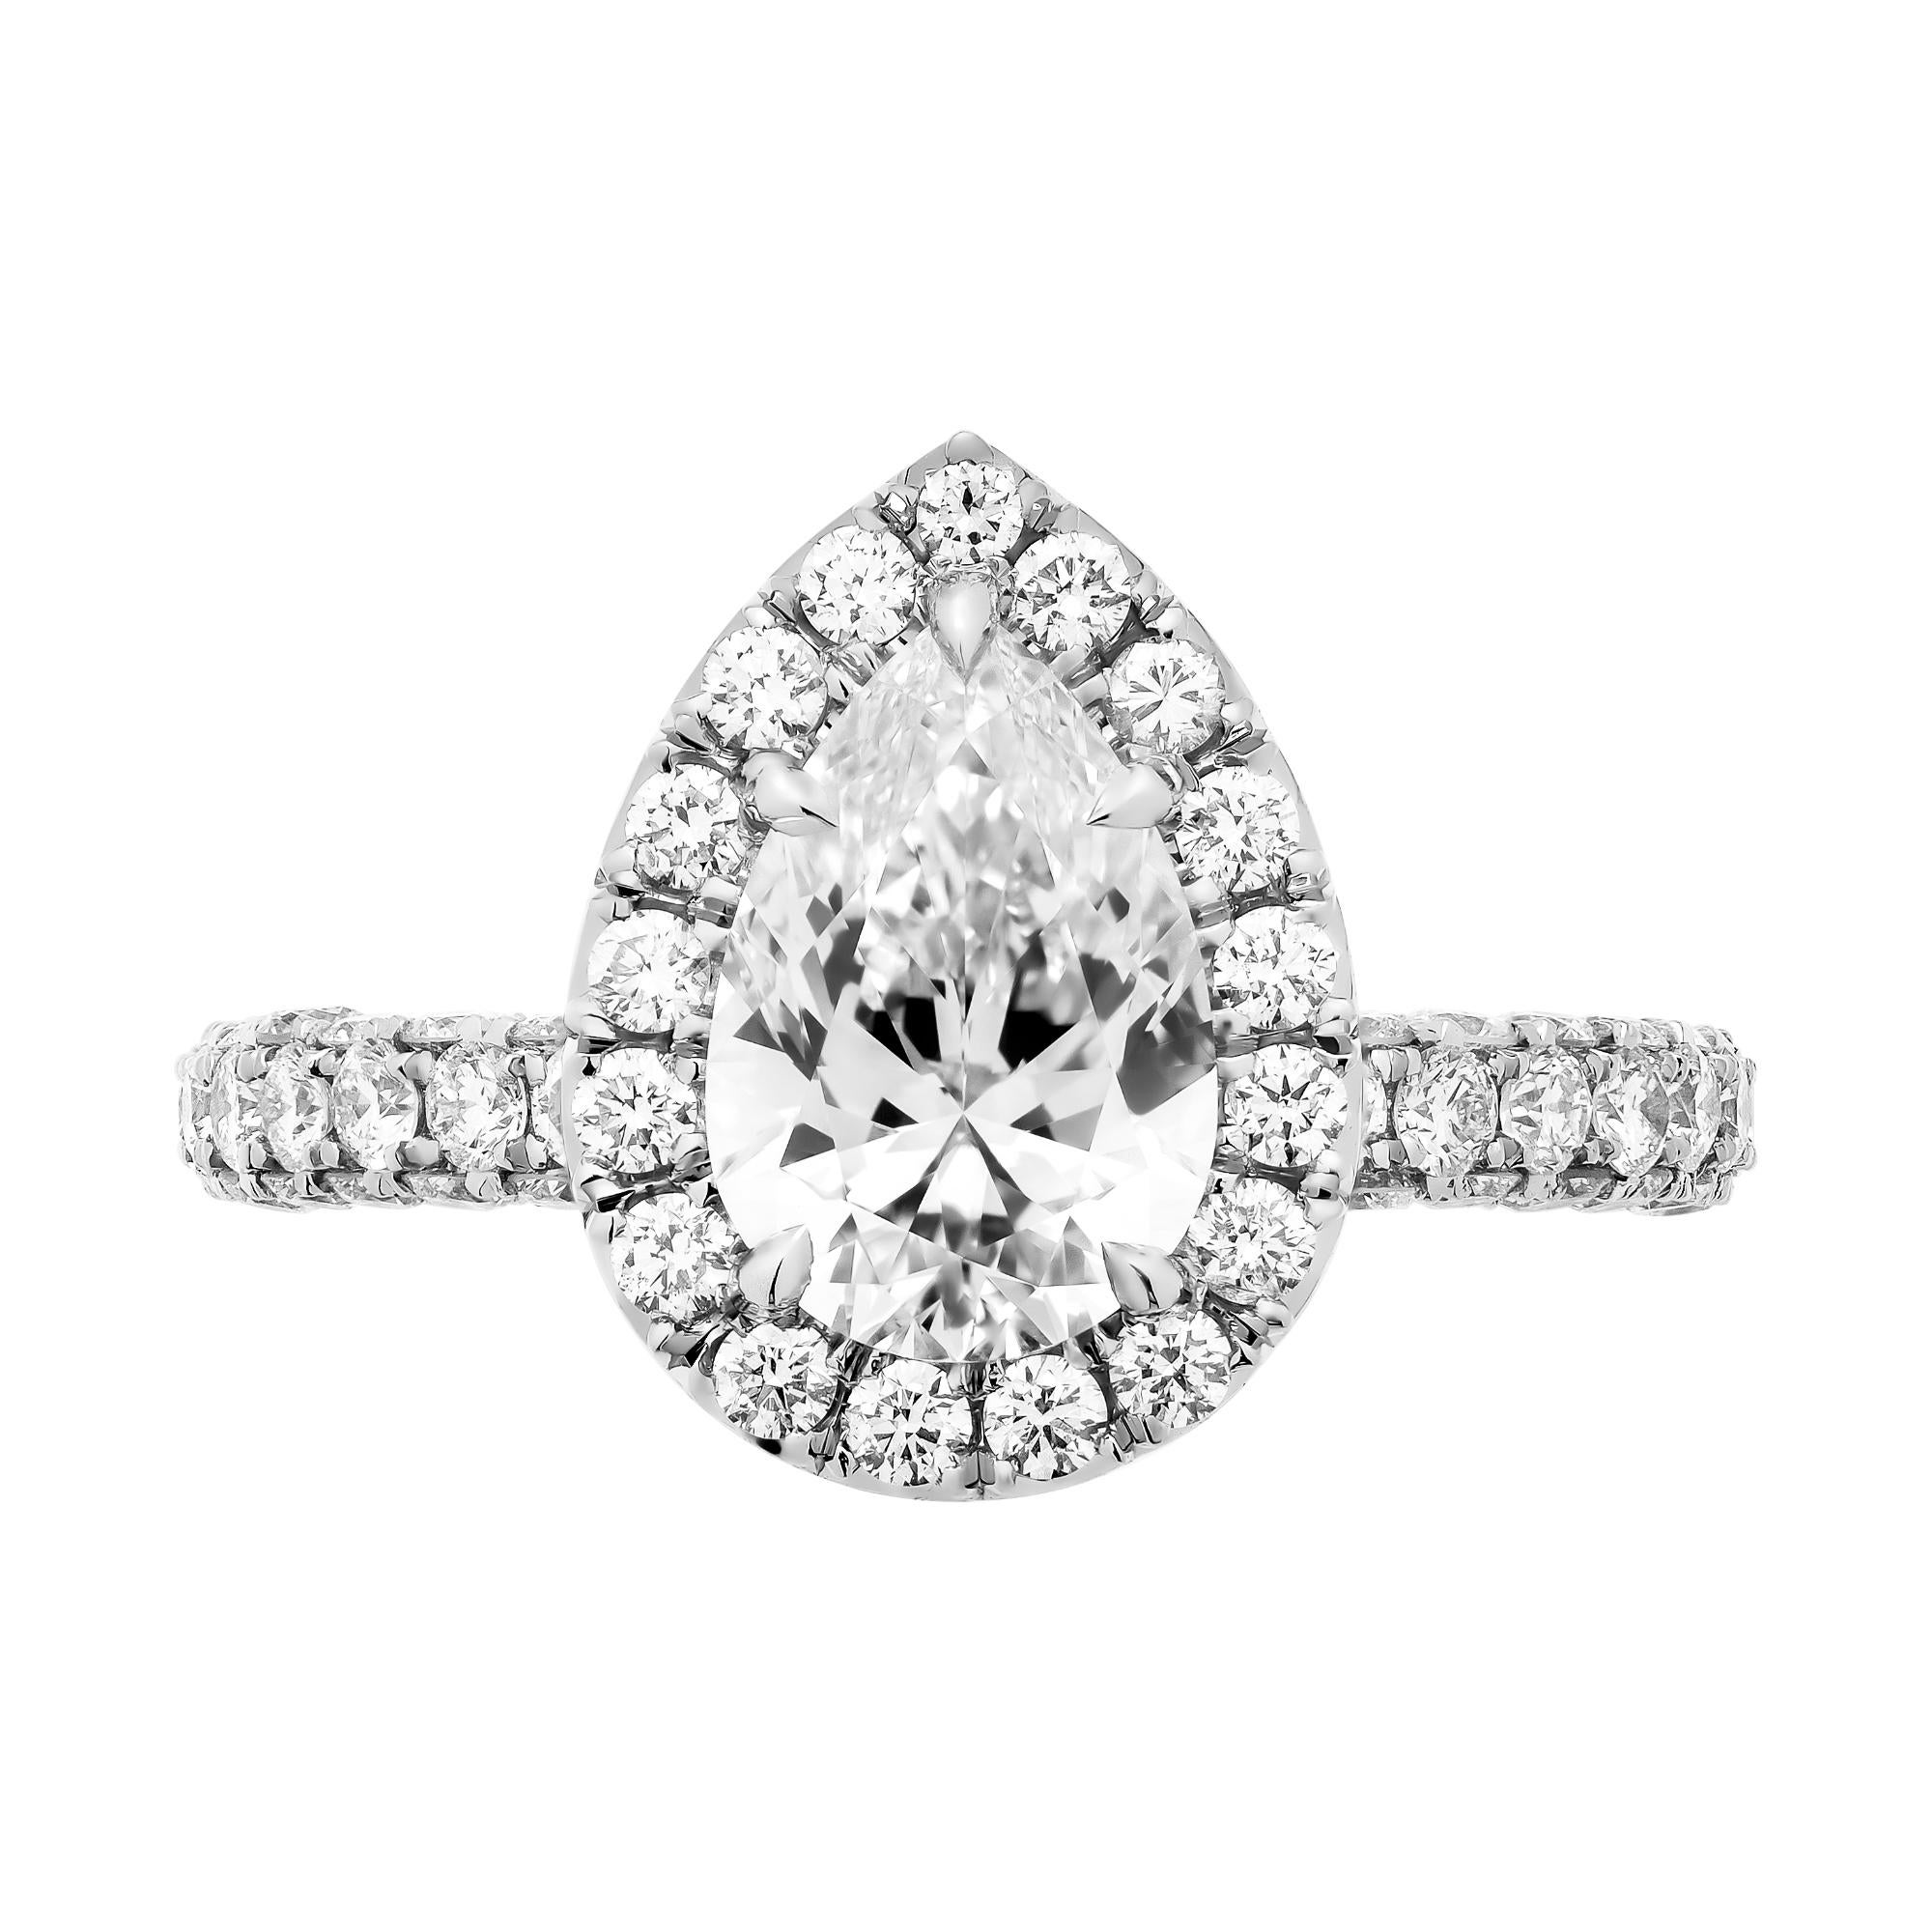 Mounted in handmade custom design setting featuring Platinum 950, white full cut diamonds are encrusted all over the fancy gallery, diamond stage and stems, double edge halo around center stone, 3 rows of diamonds on the  shank - complimenting the